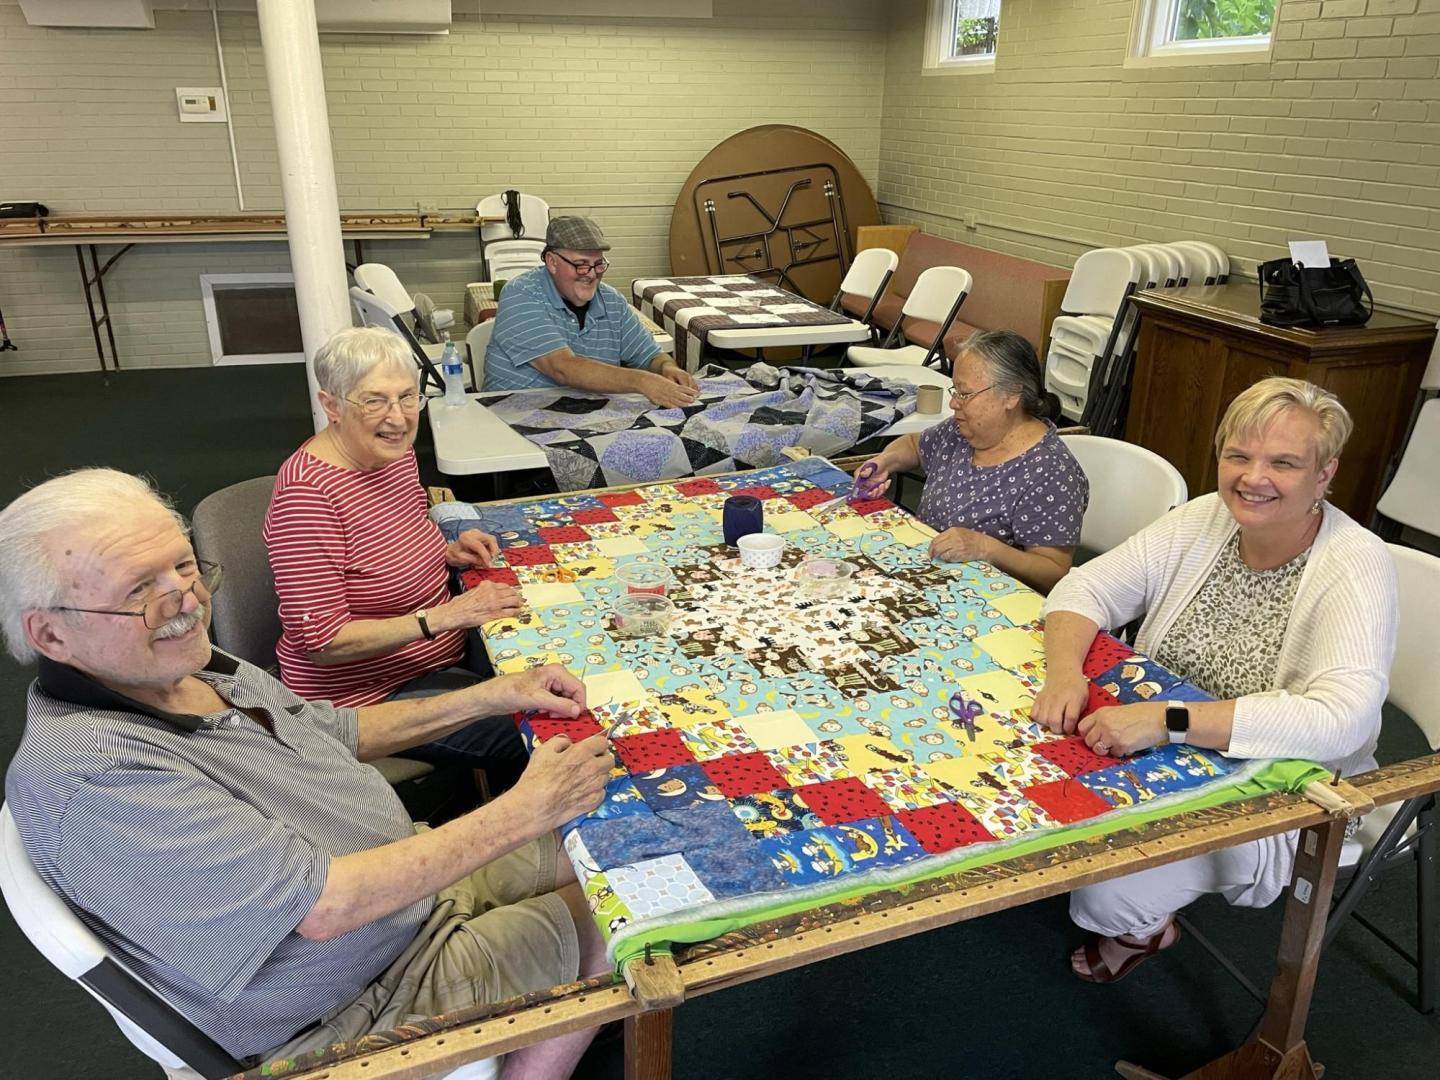 A group of five people sewing comforters